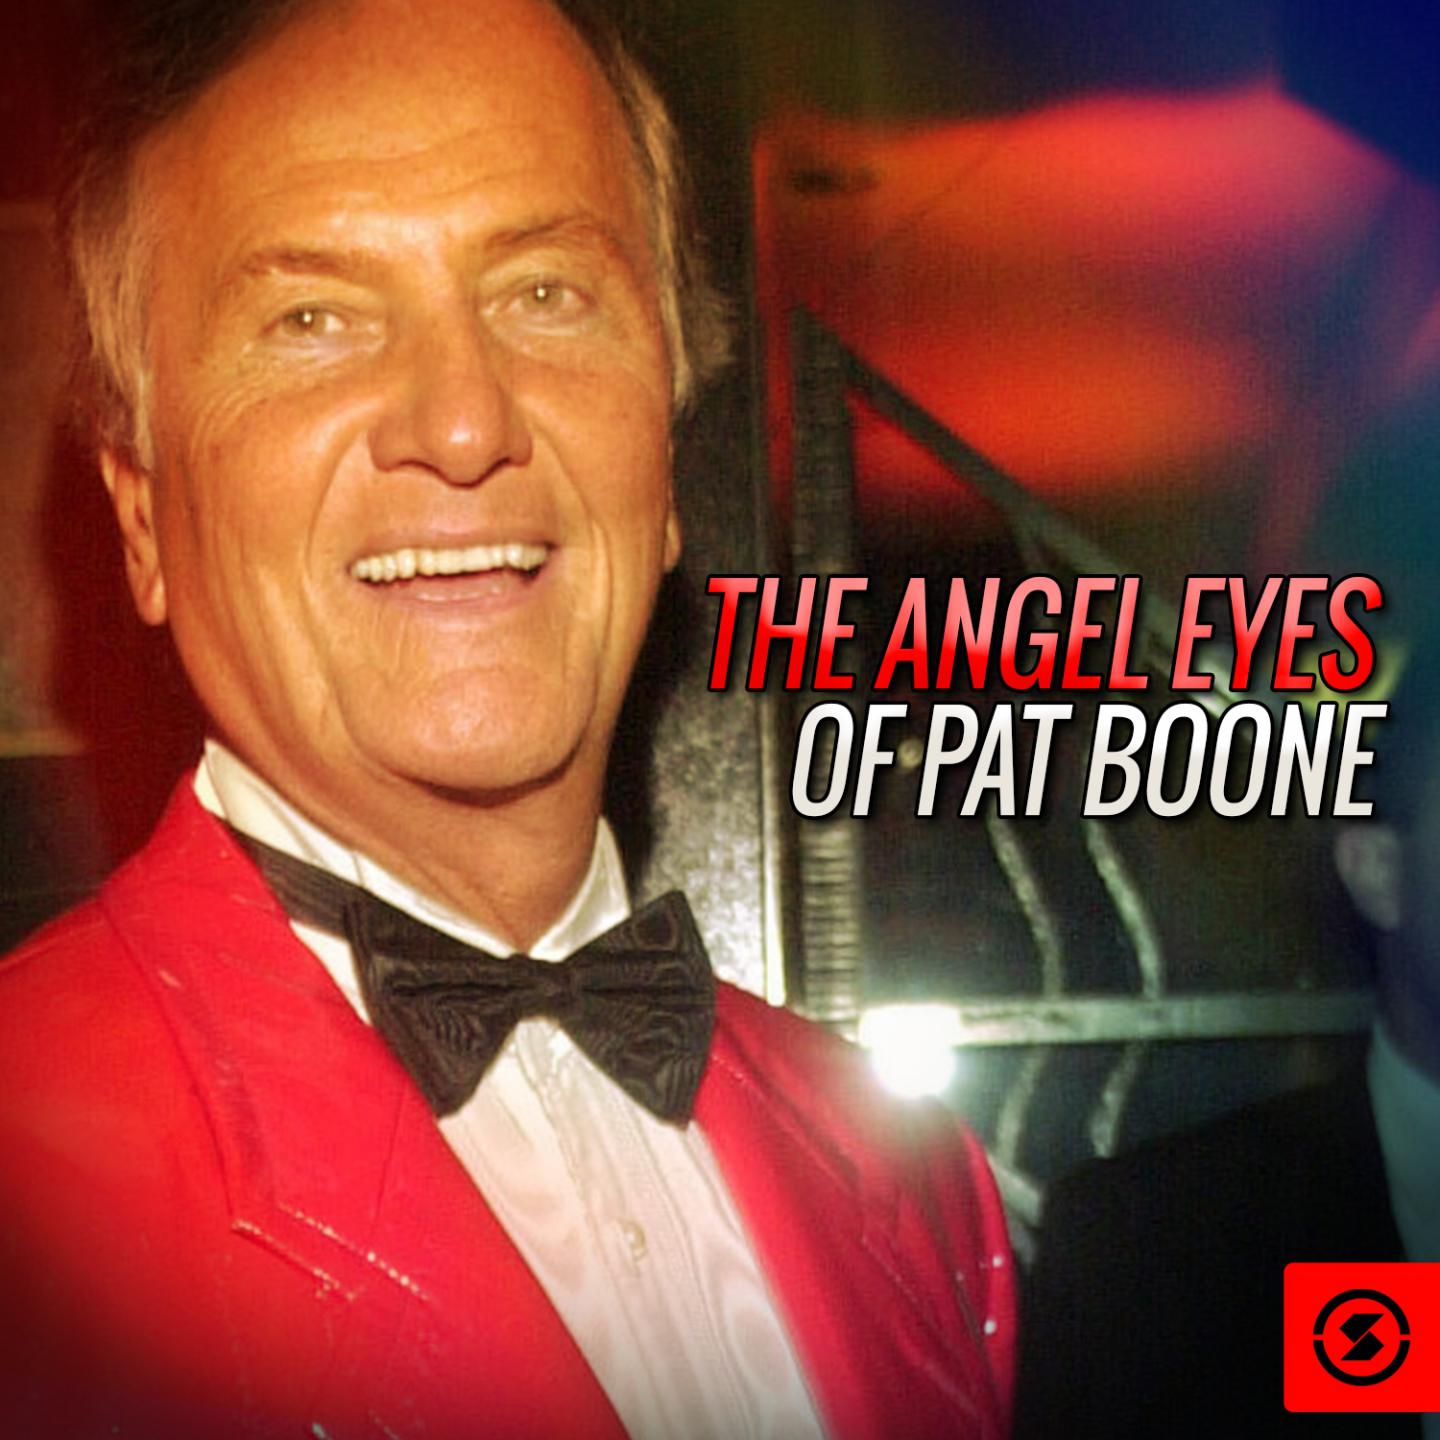 The Angel Eyes of Pat Boone